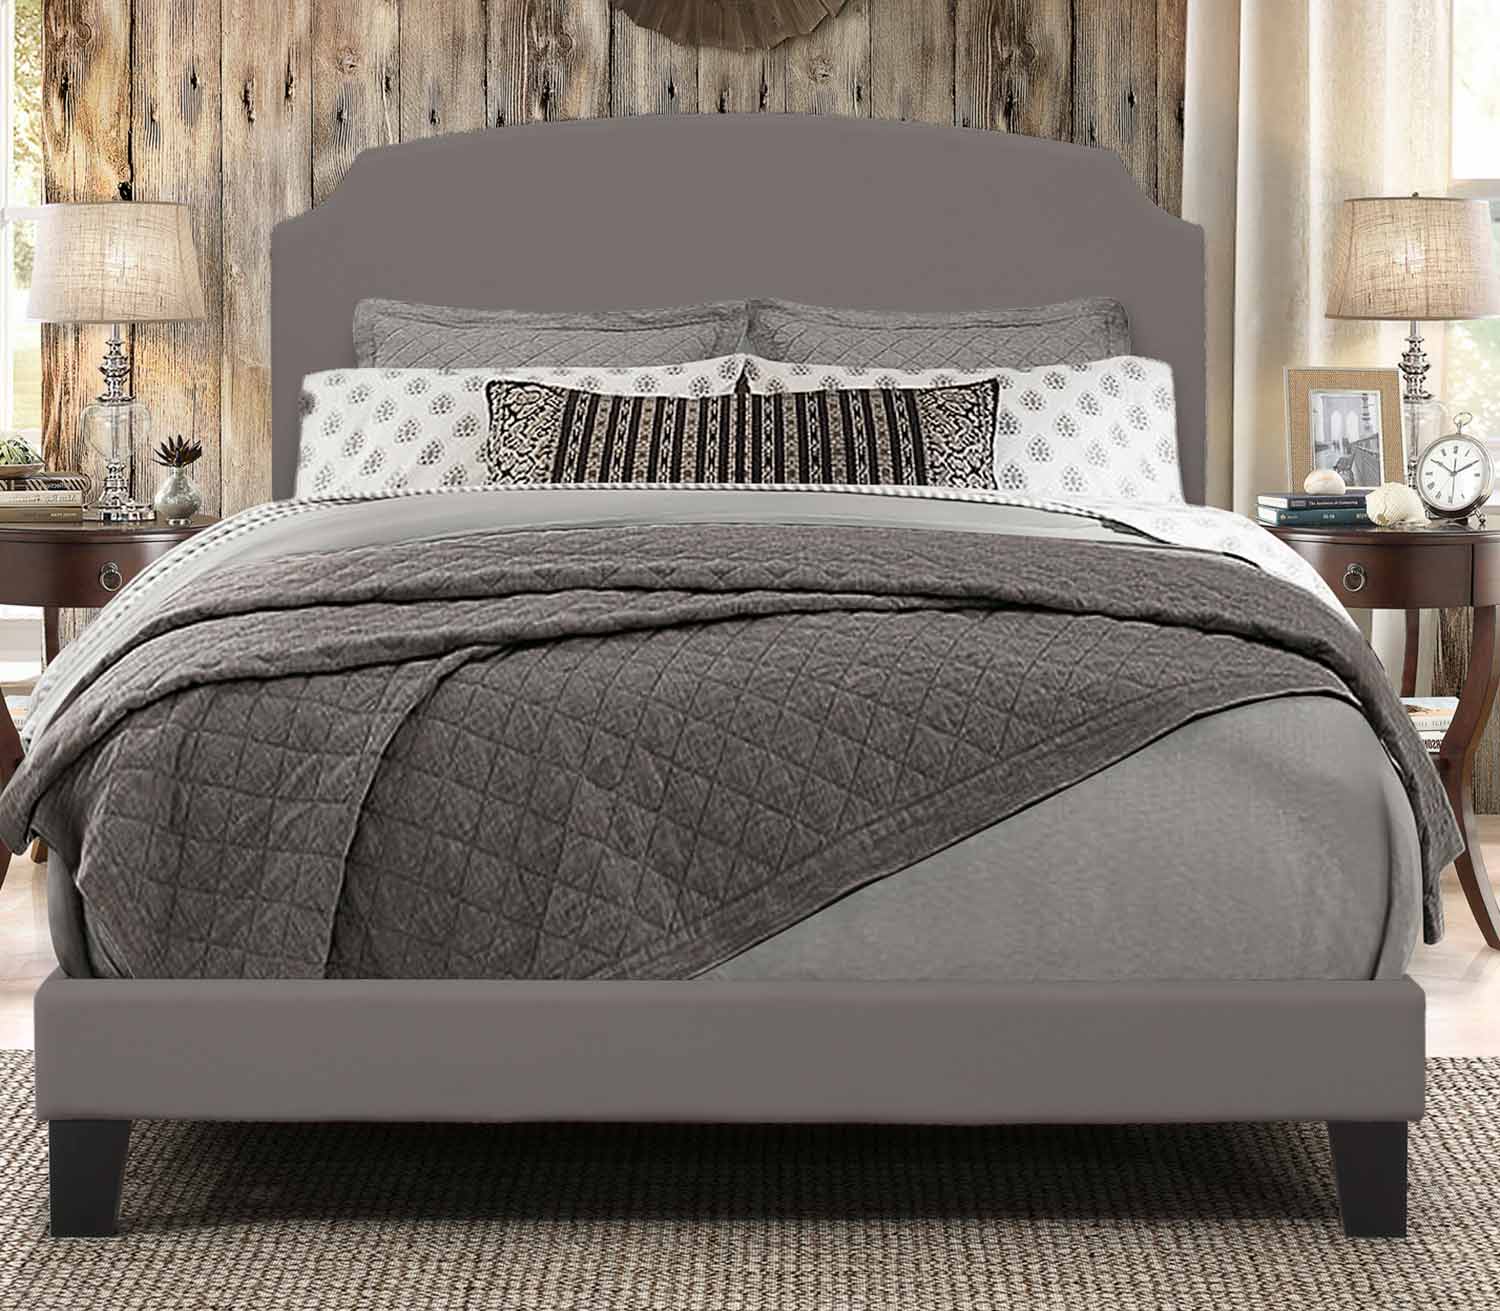 Hillsdale Desi Bed - Stone HD-2036-463-Bed at Homelement.com